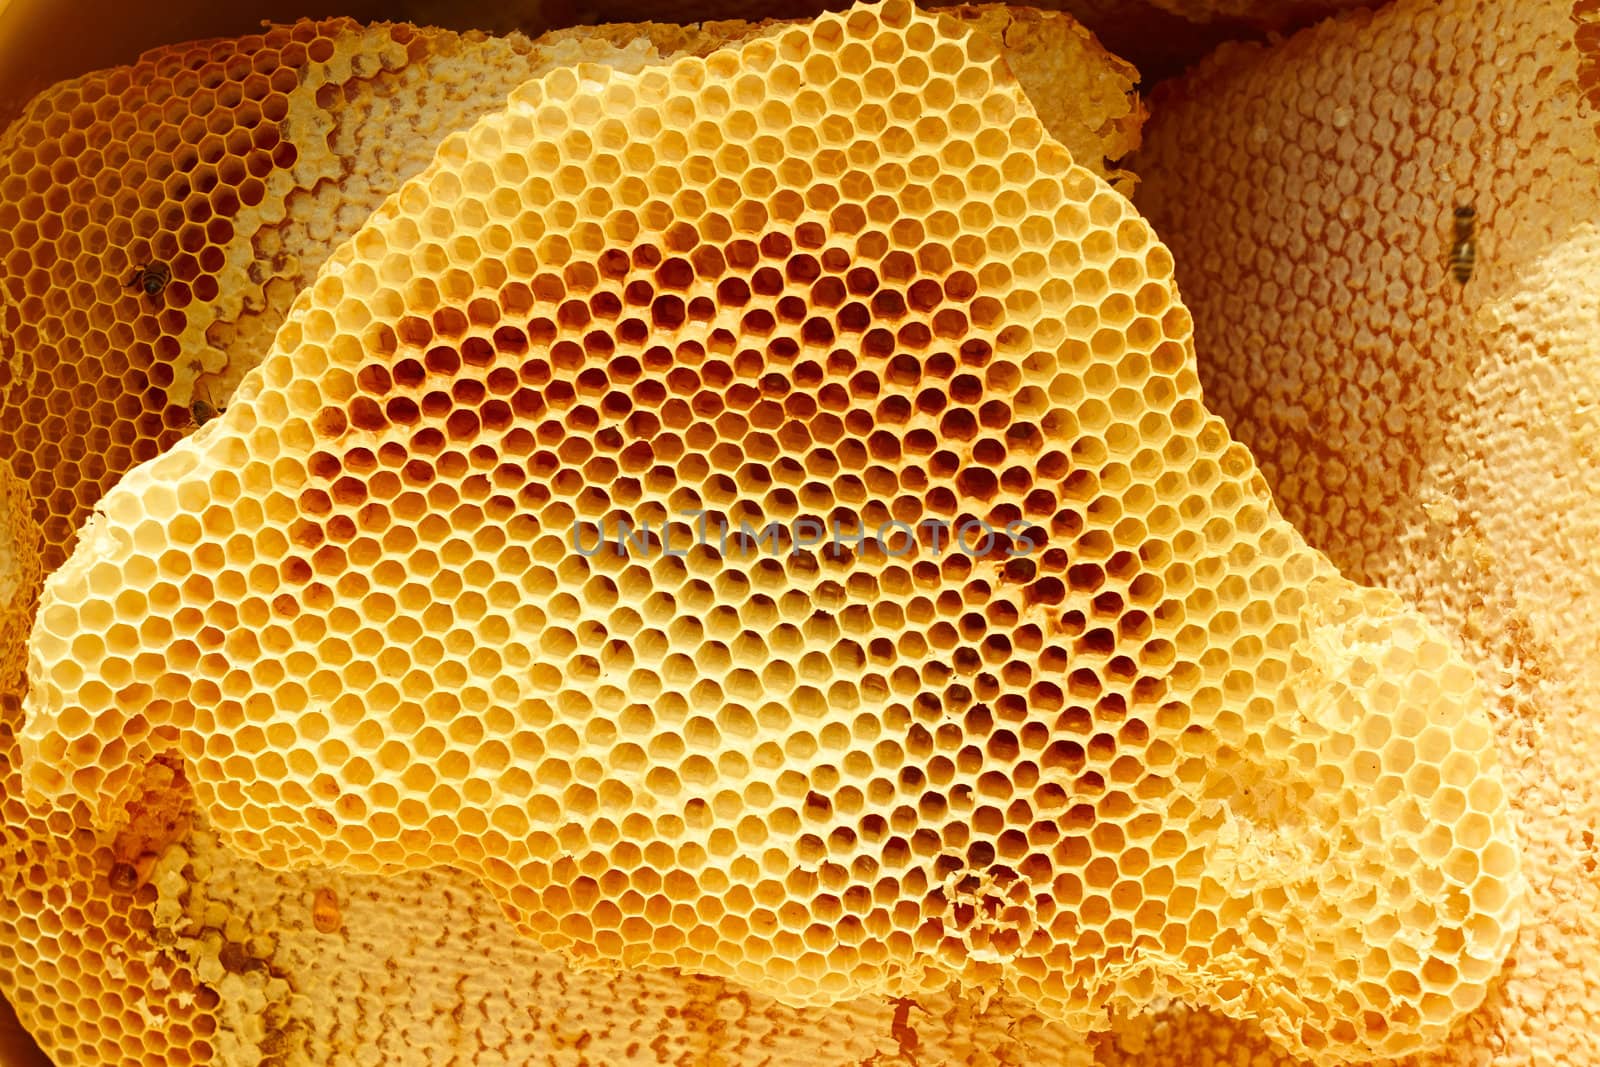 Honeycomb pieces in bright sunlight by qiiip